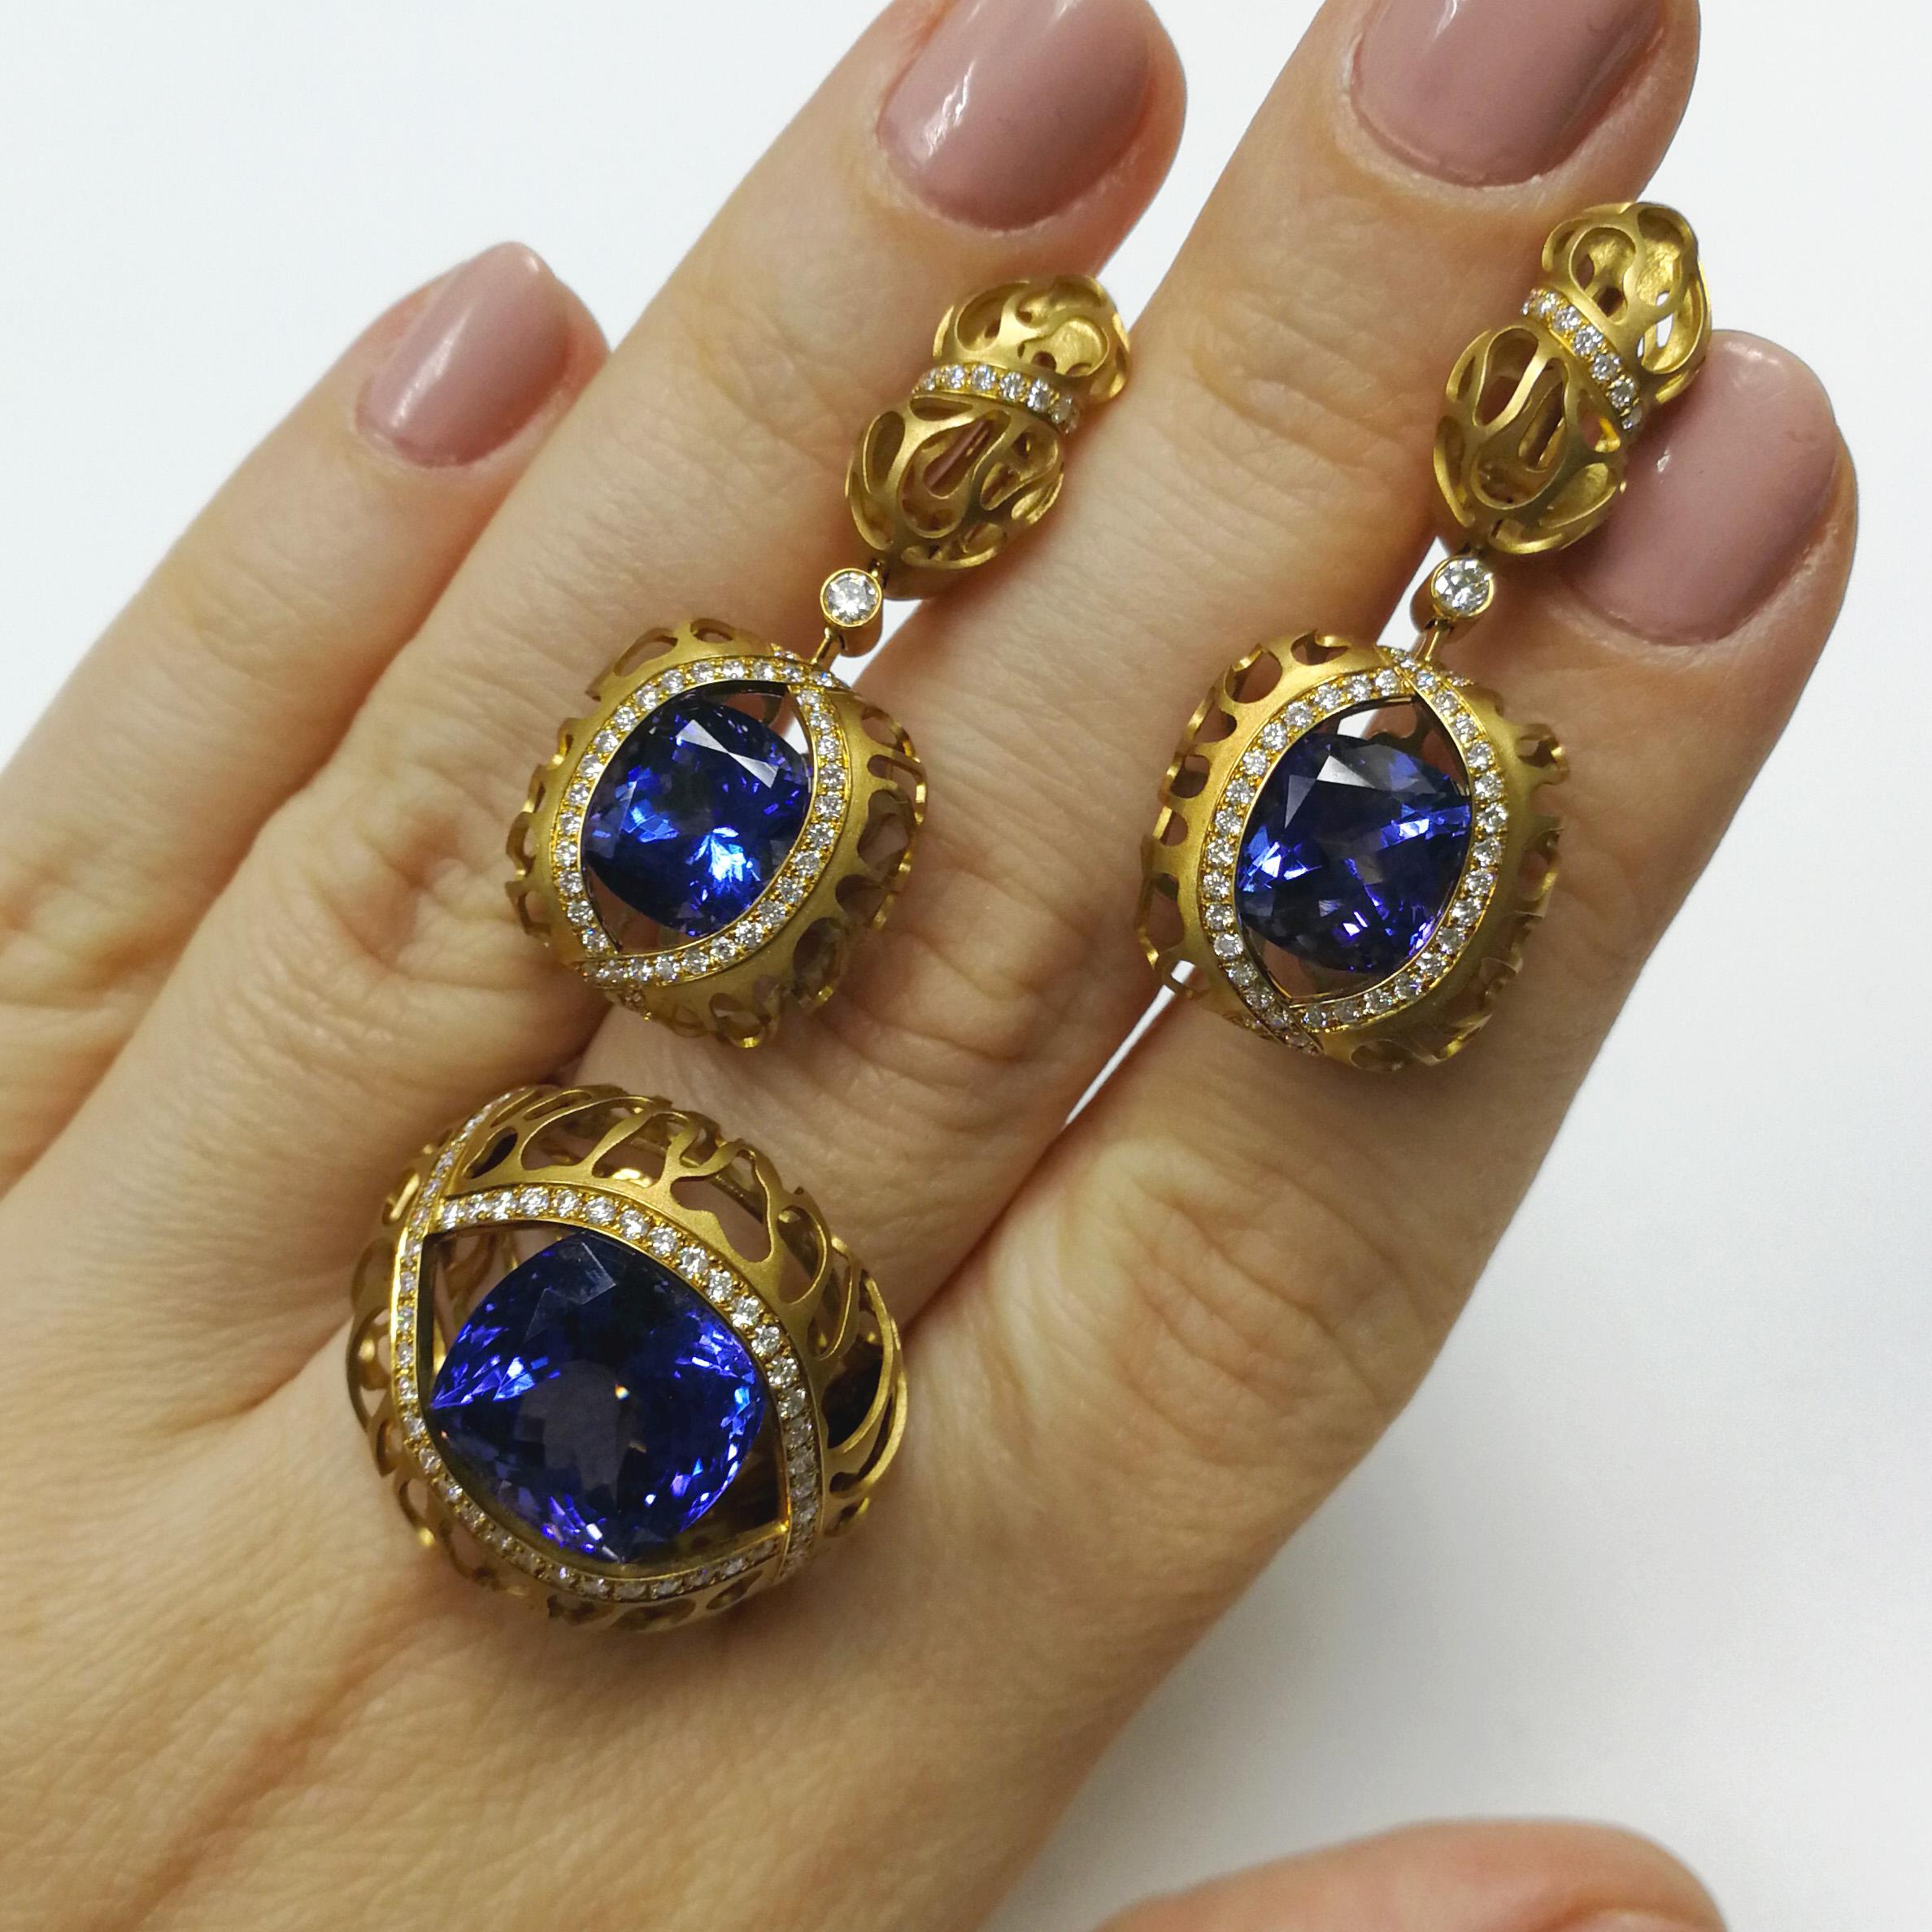 Tanzanite Diamonds 18 Karat Yellow Gold Coral Reef Suite
Suite from the Coral Reef collection, where the distinctive feature is the shape of 18 Karat Yellow Gold, made in the form of coral reefs. The perfect combination of Tanzanites and Diamonds